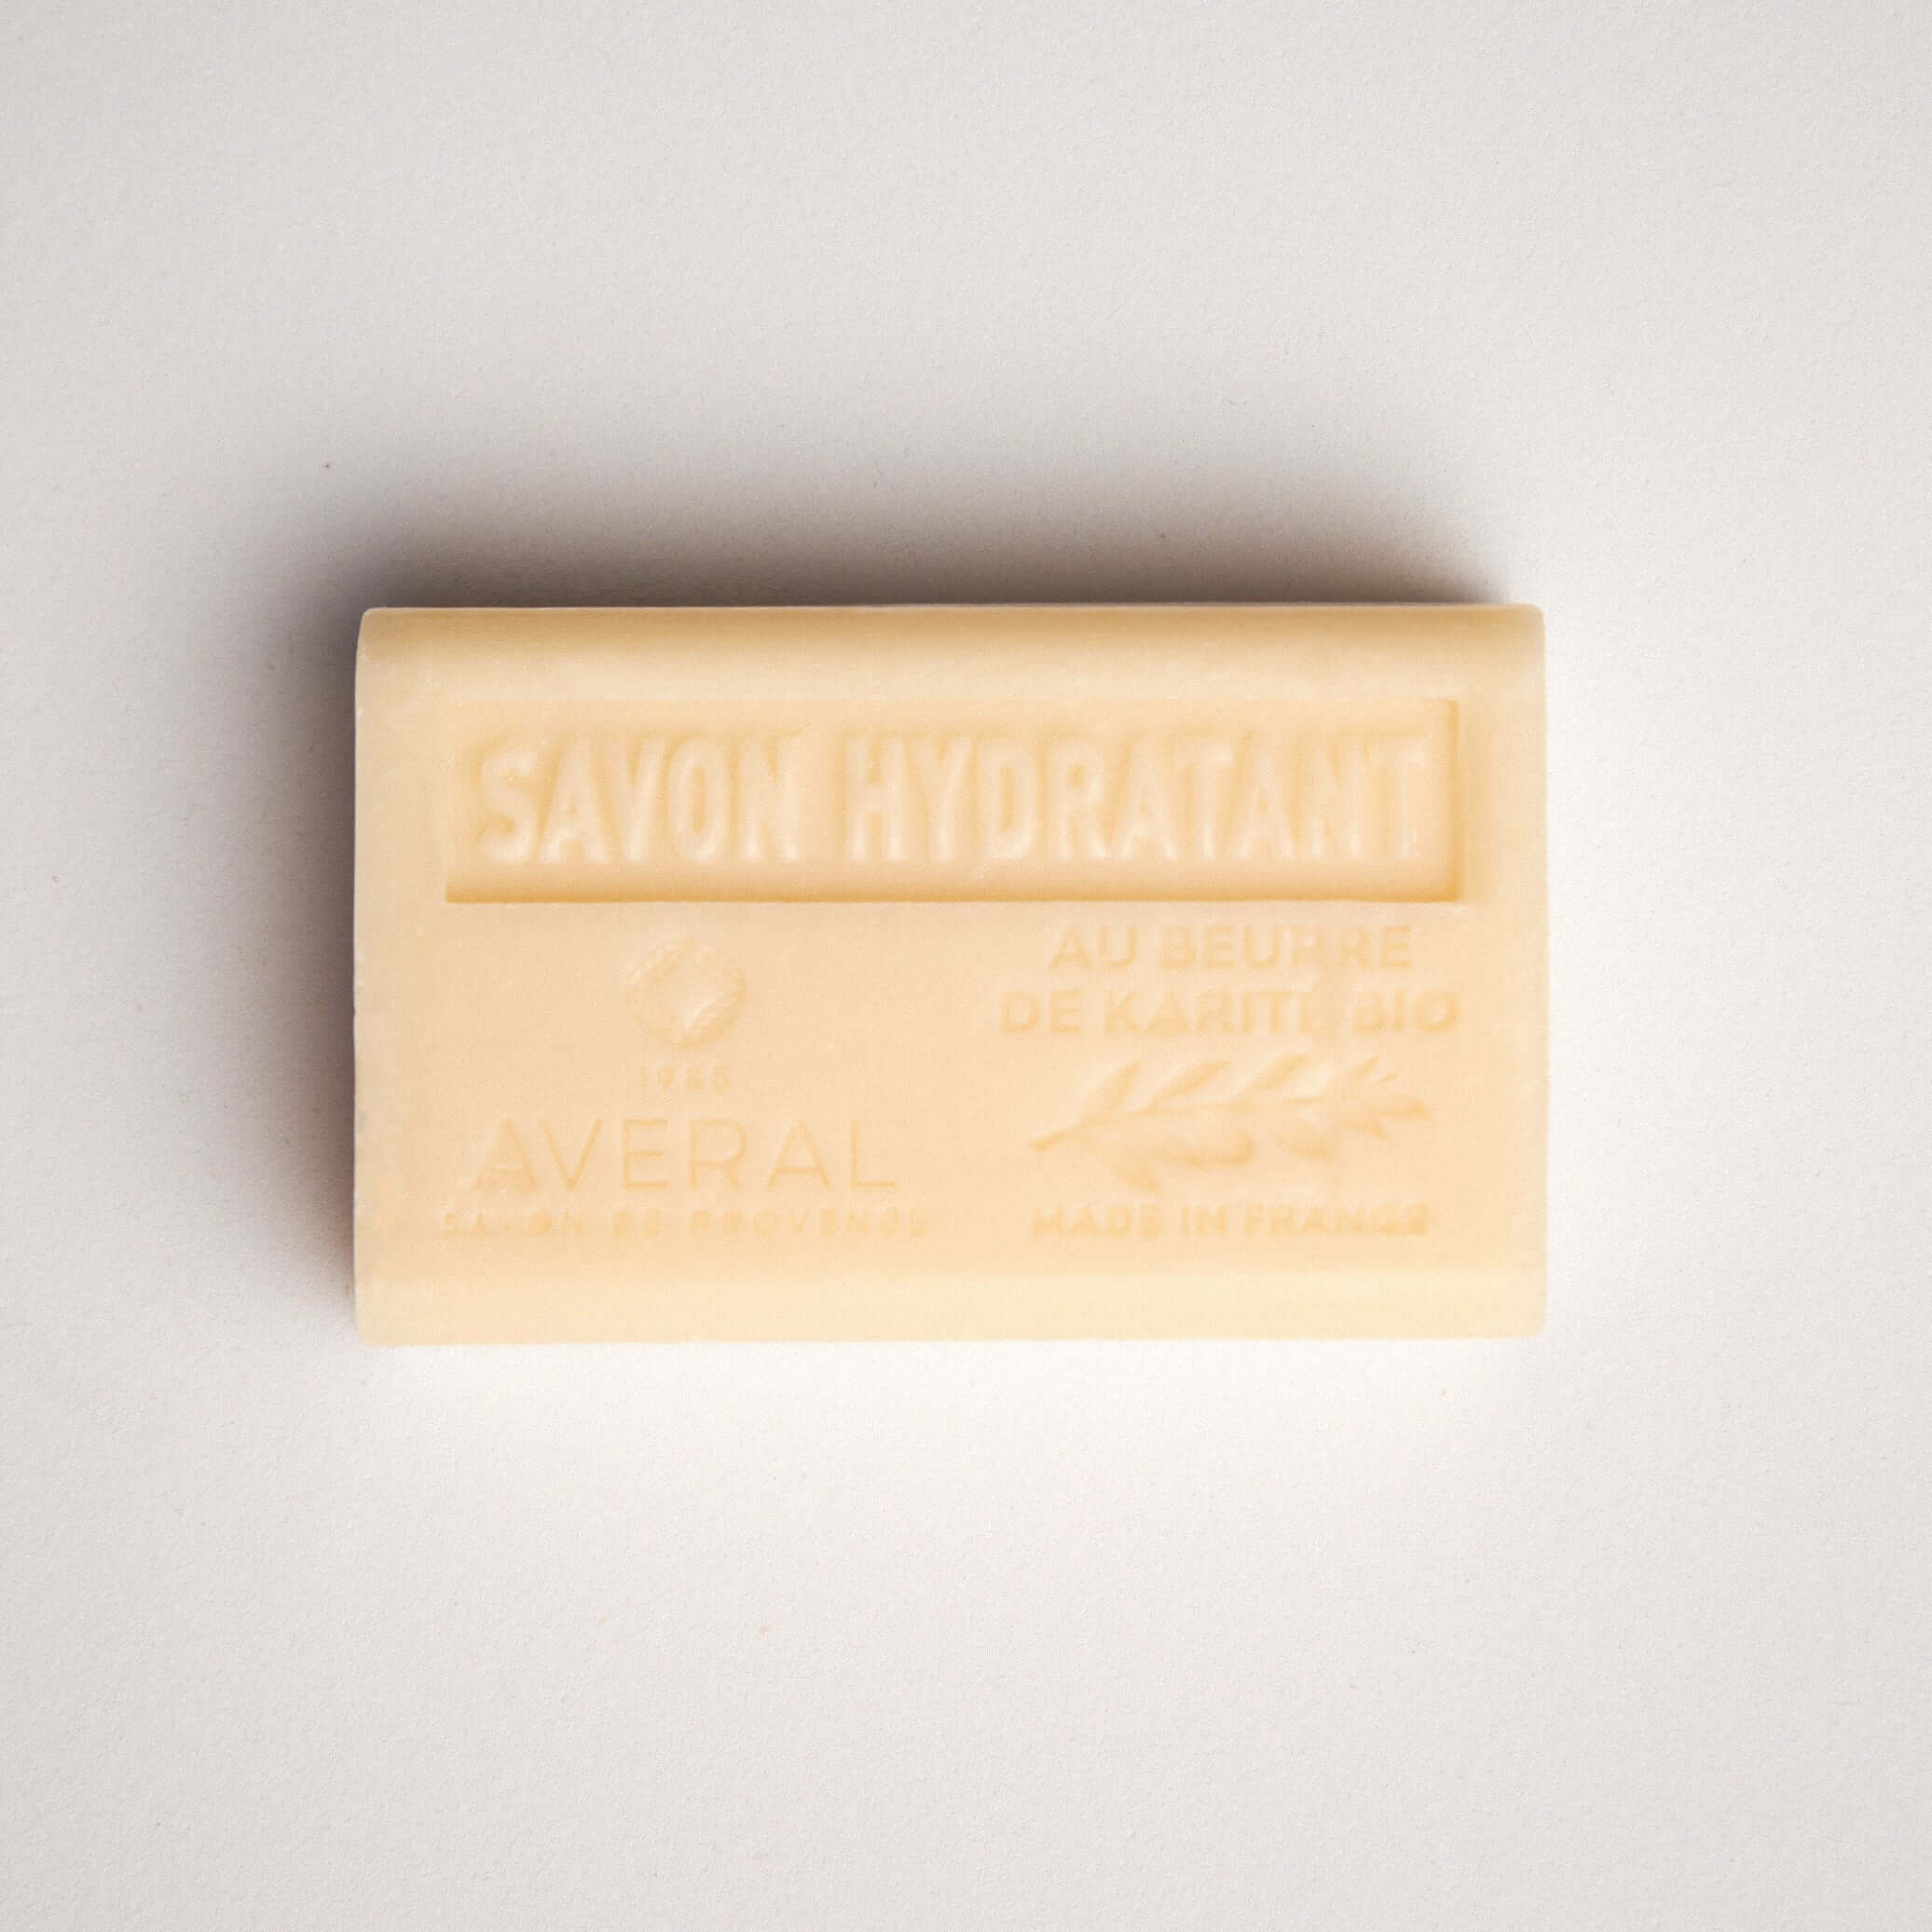 Triple-Milled Shea Butter Soap, USA Made